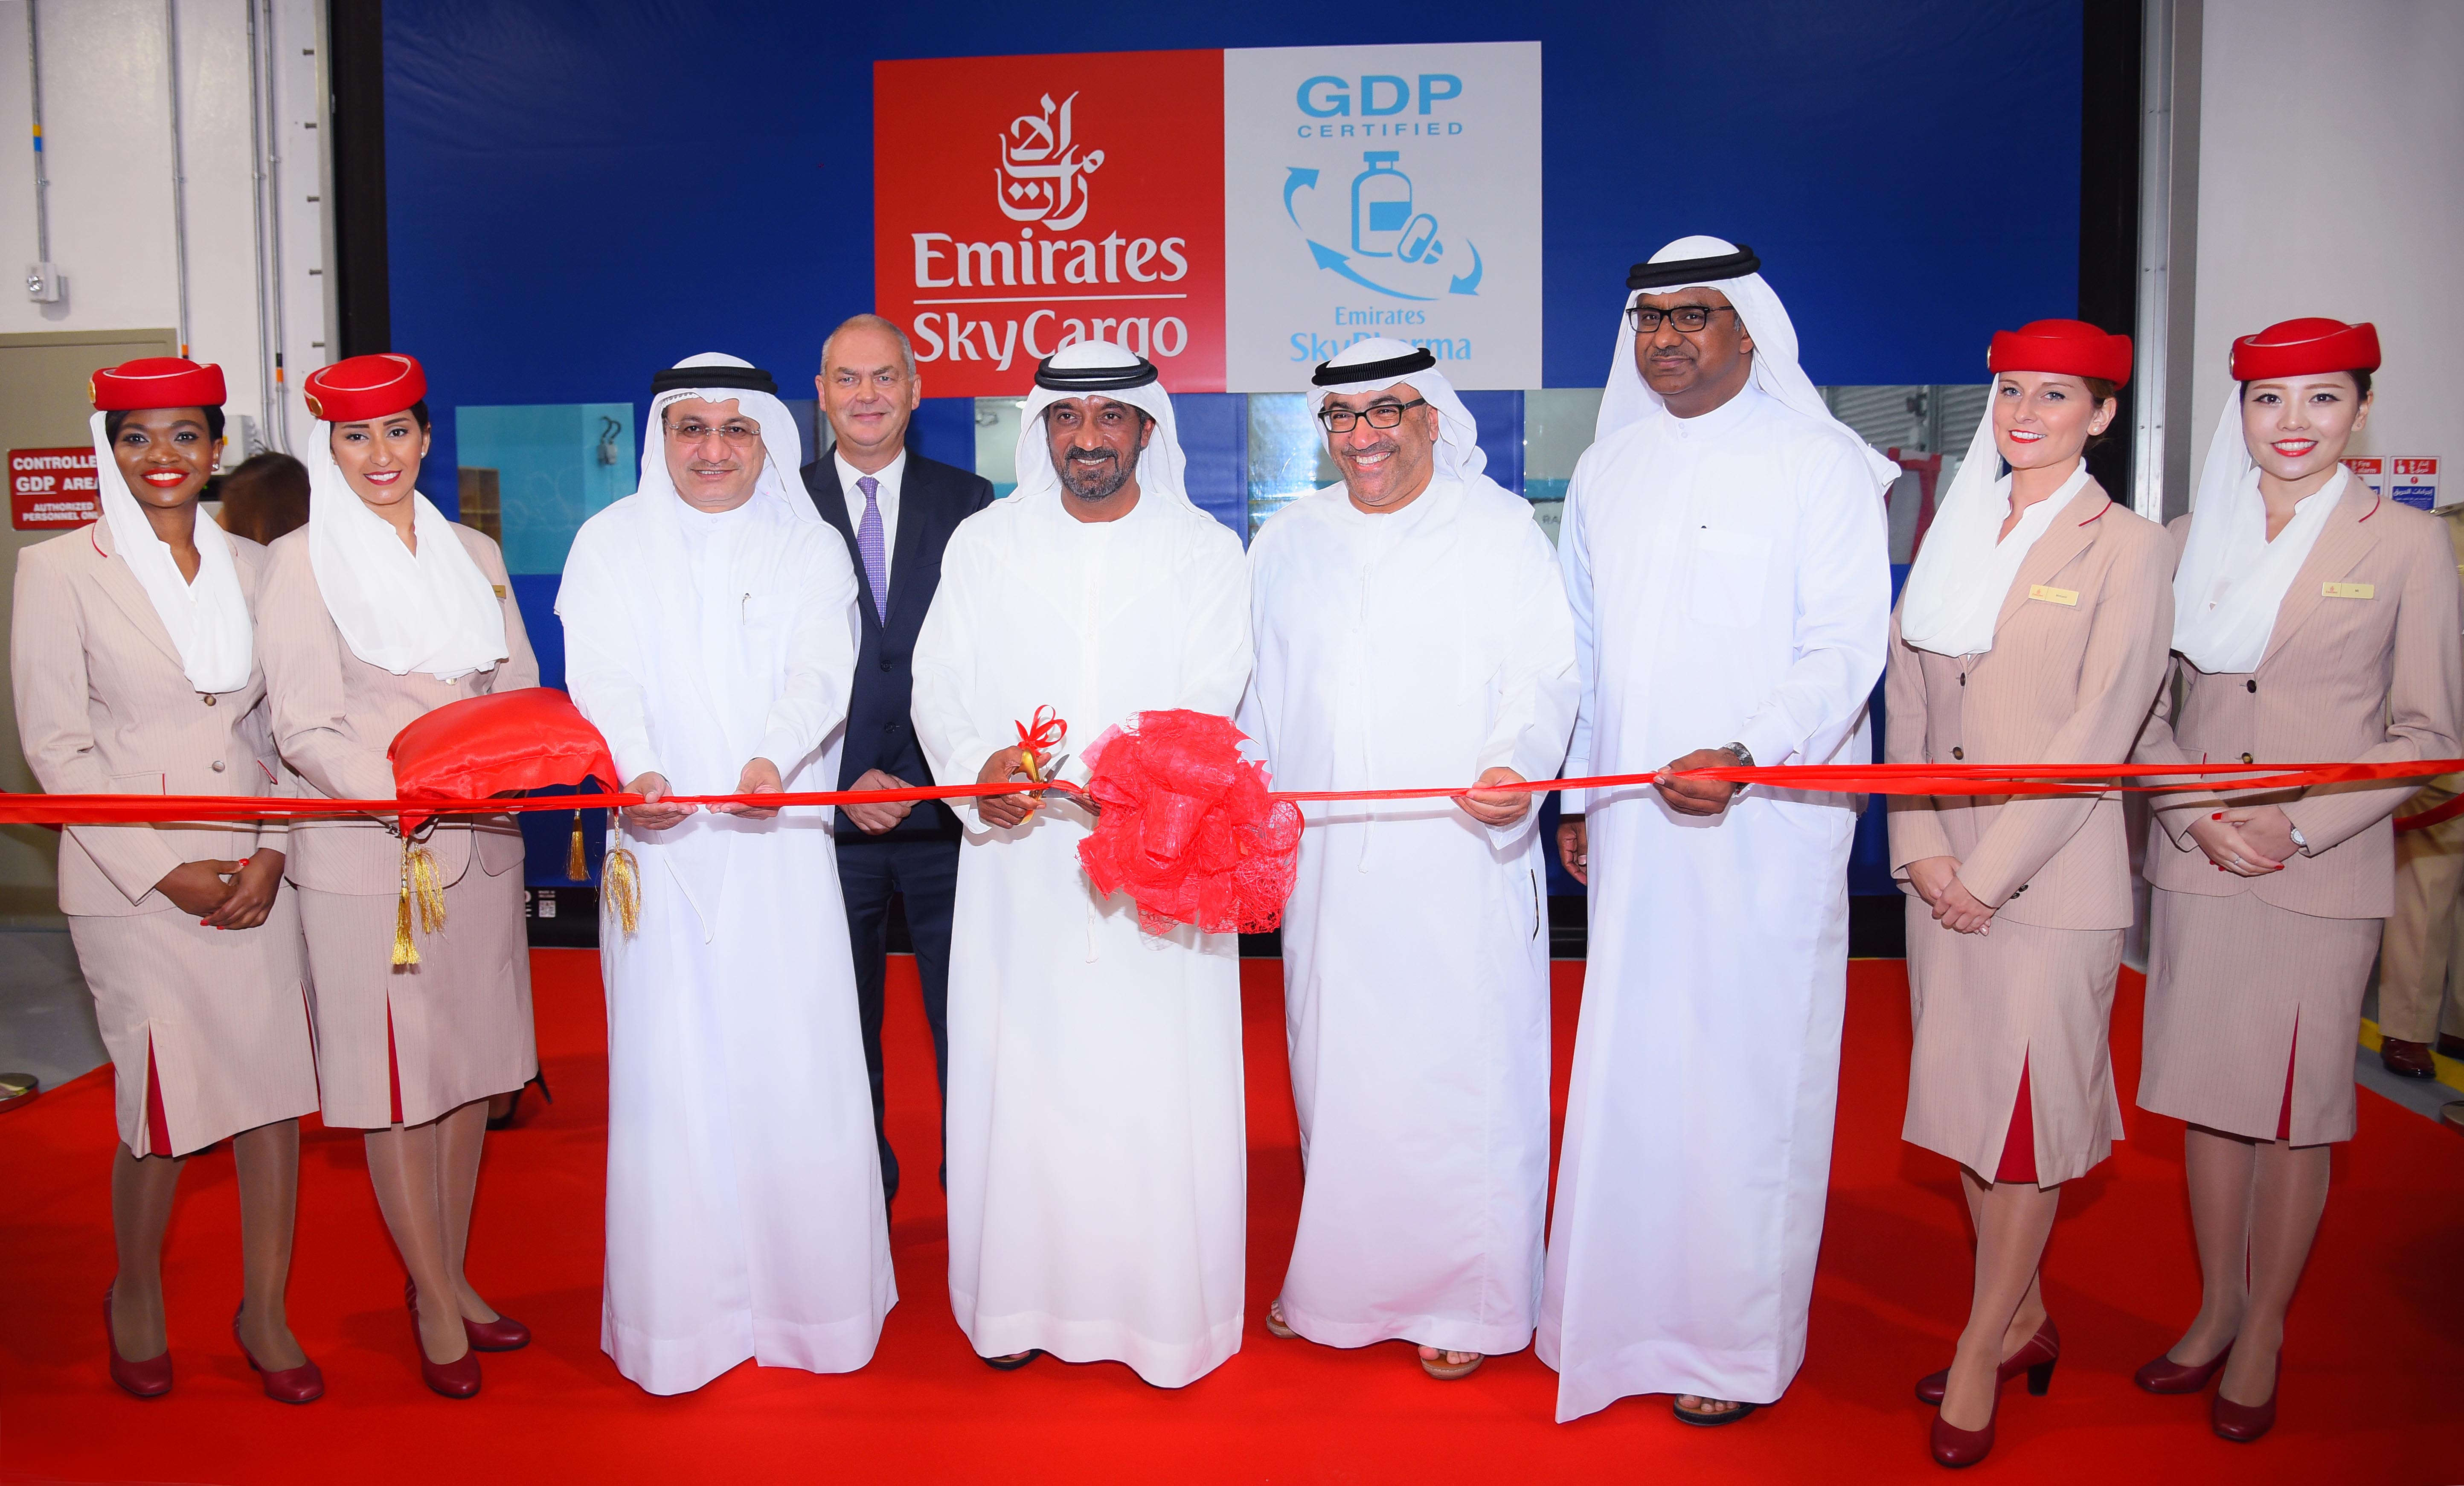 His Highness Sheikh Ahmed bin Saeed Al Maktoum, Chairman and Chief Executive of Emirates Airline and Group with dignitaries at the inauguration of Emirates SkyPharma.